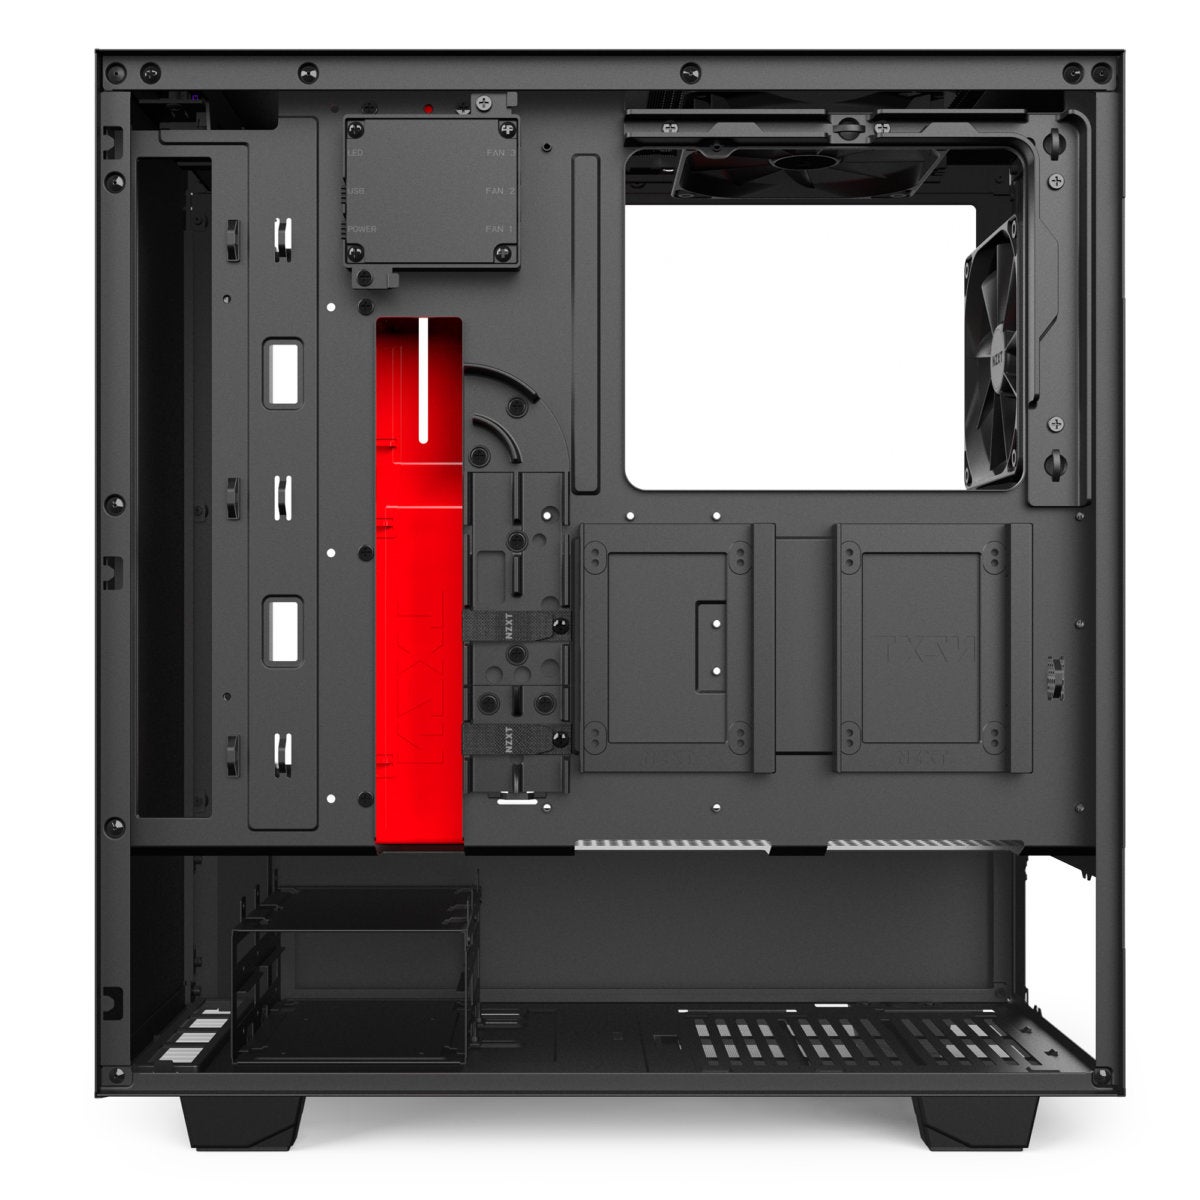 PC/タブレット PCパーツ NZXT H500i review: A $100 case loaded with premium features | PCWorld